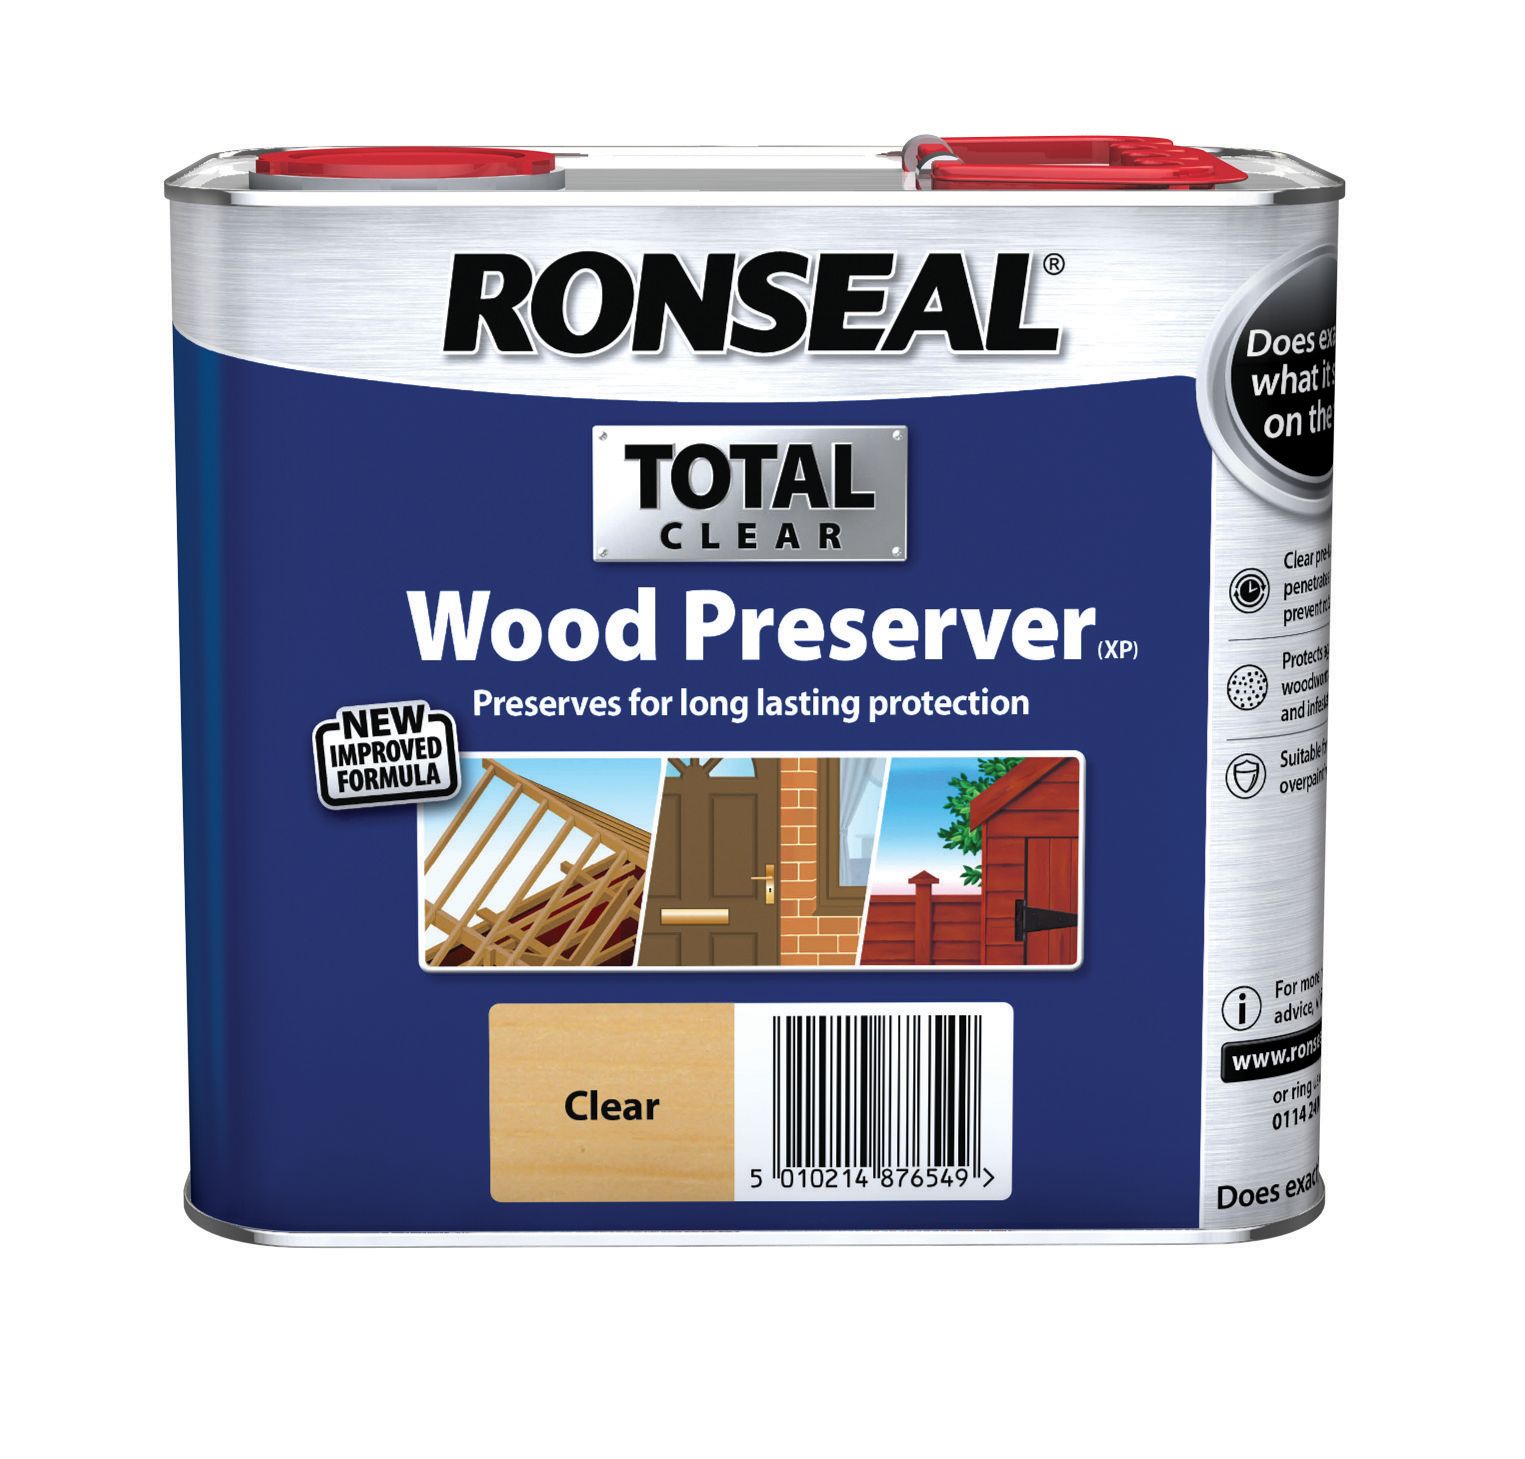 Ronseal Total Wood Preserver Clear 2.5L